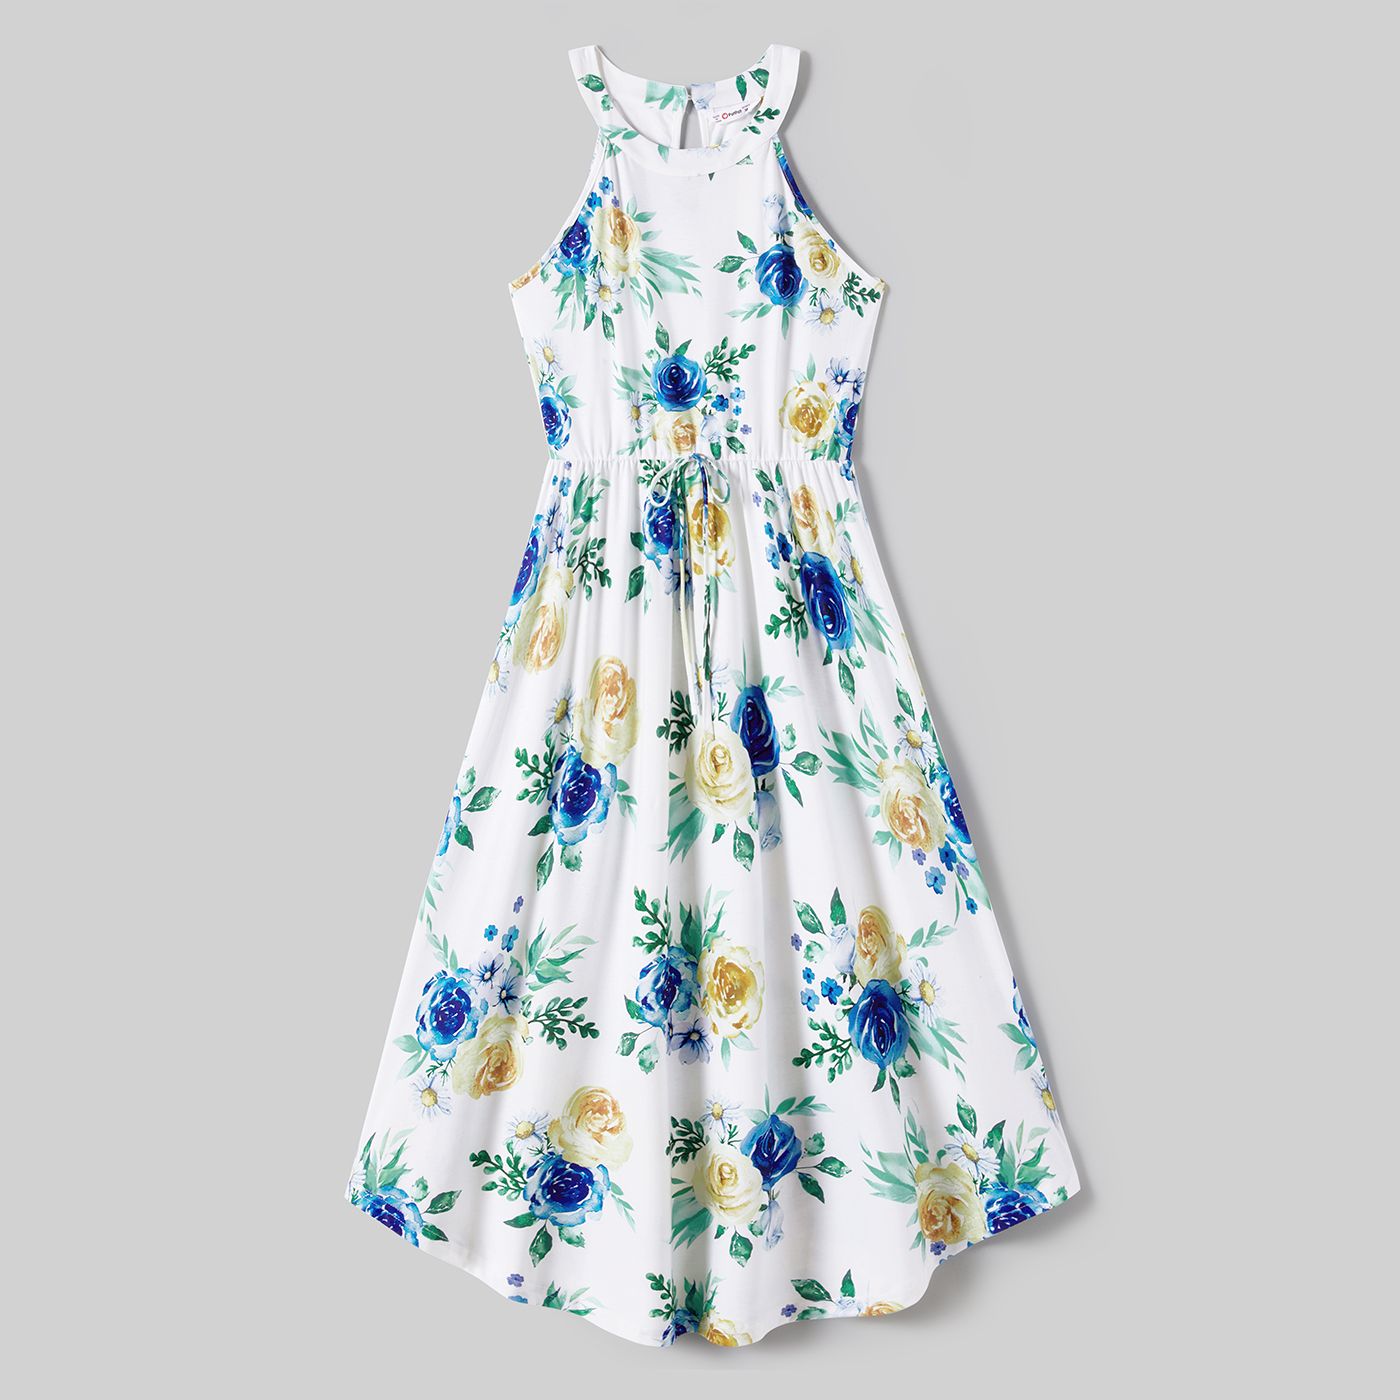 Family Matching Allover Floral Print Drawstring Waist Halter Neck Dresses And Color Block Short-sleeve T-shirts Sets